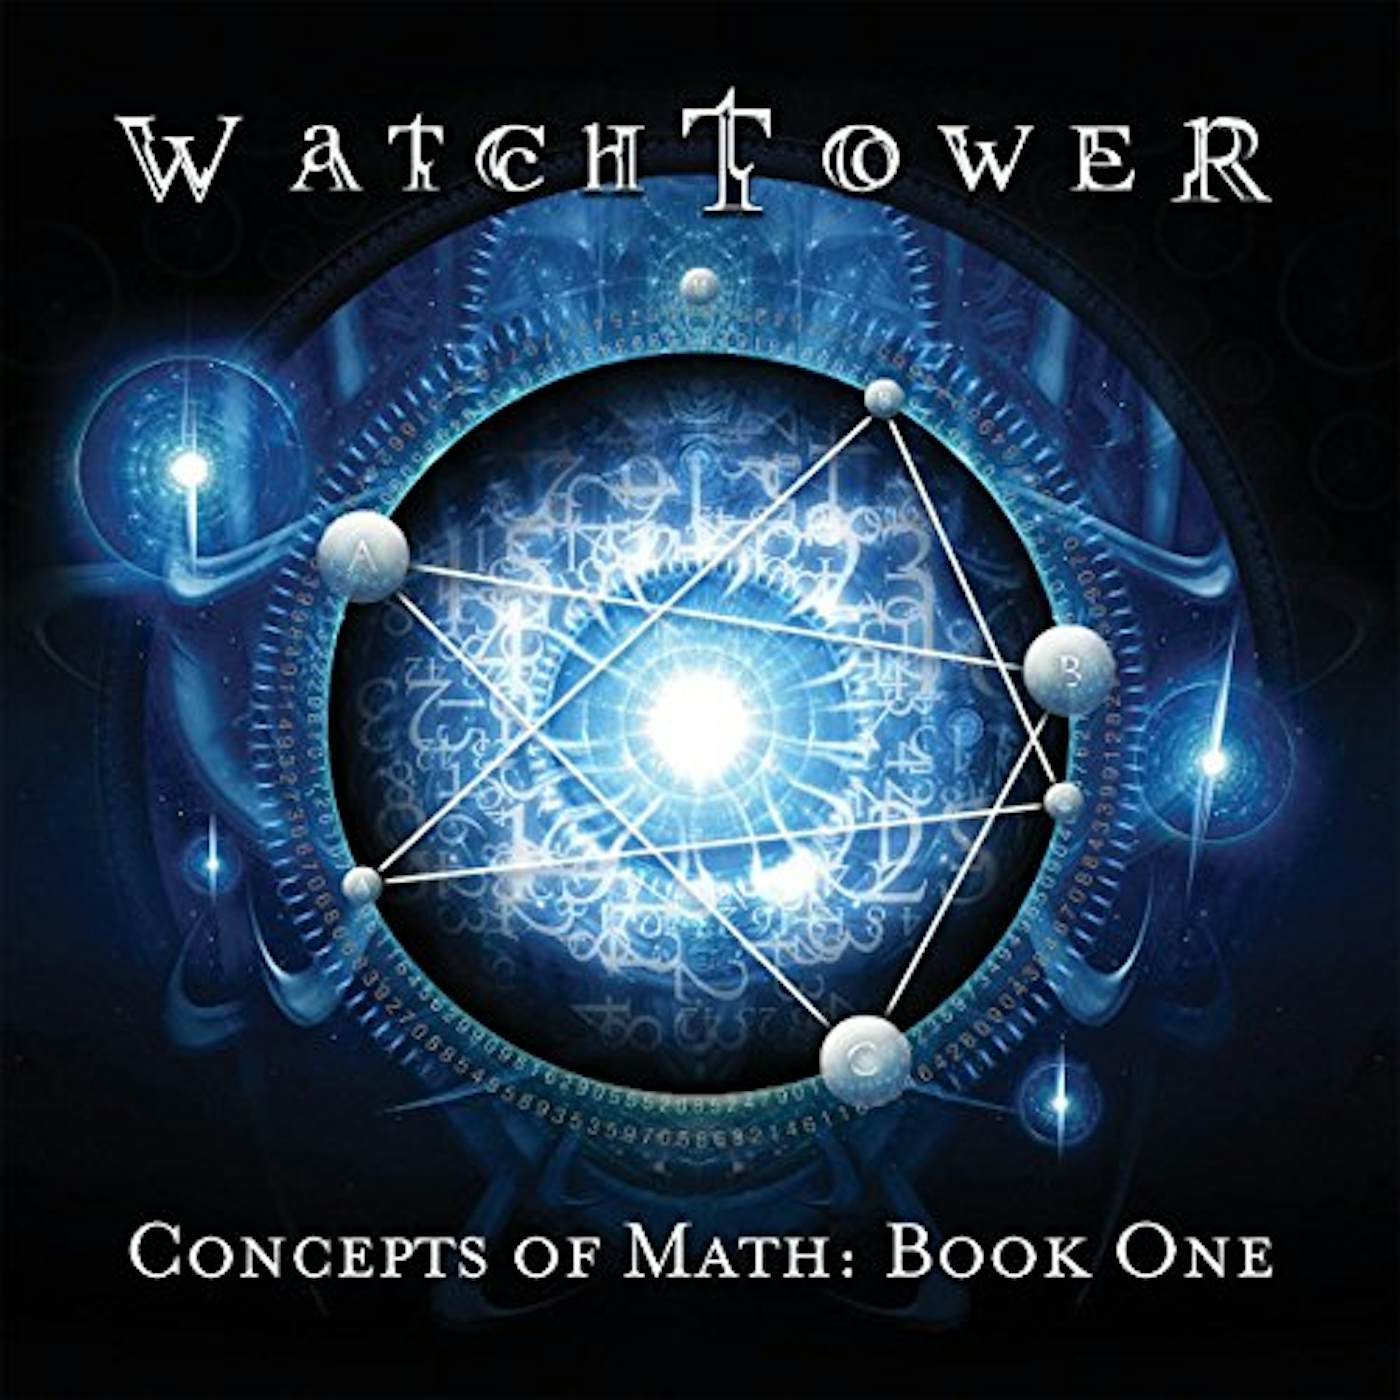 Watchtower Concepts of Math: Book One Vinyl Record